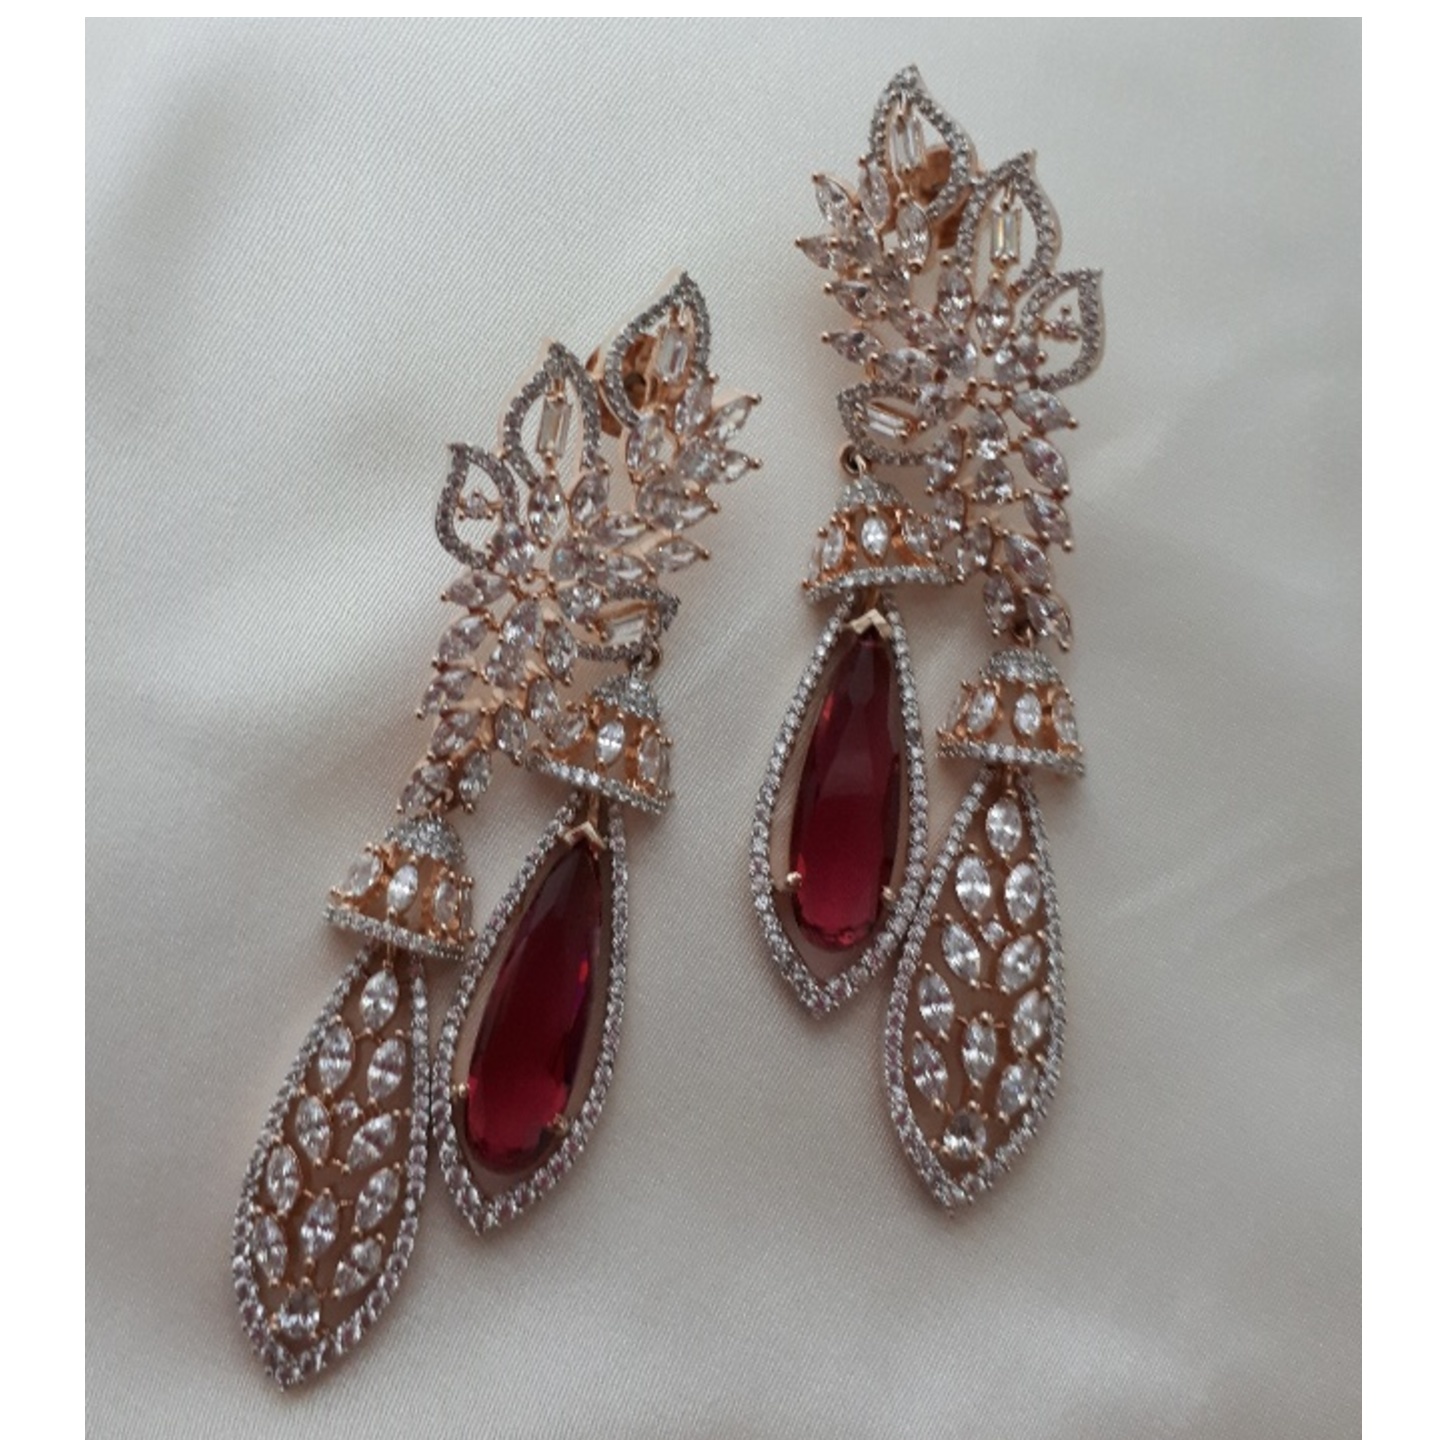 Gold American Diamond Earrings with Ruby Crystal